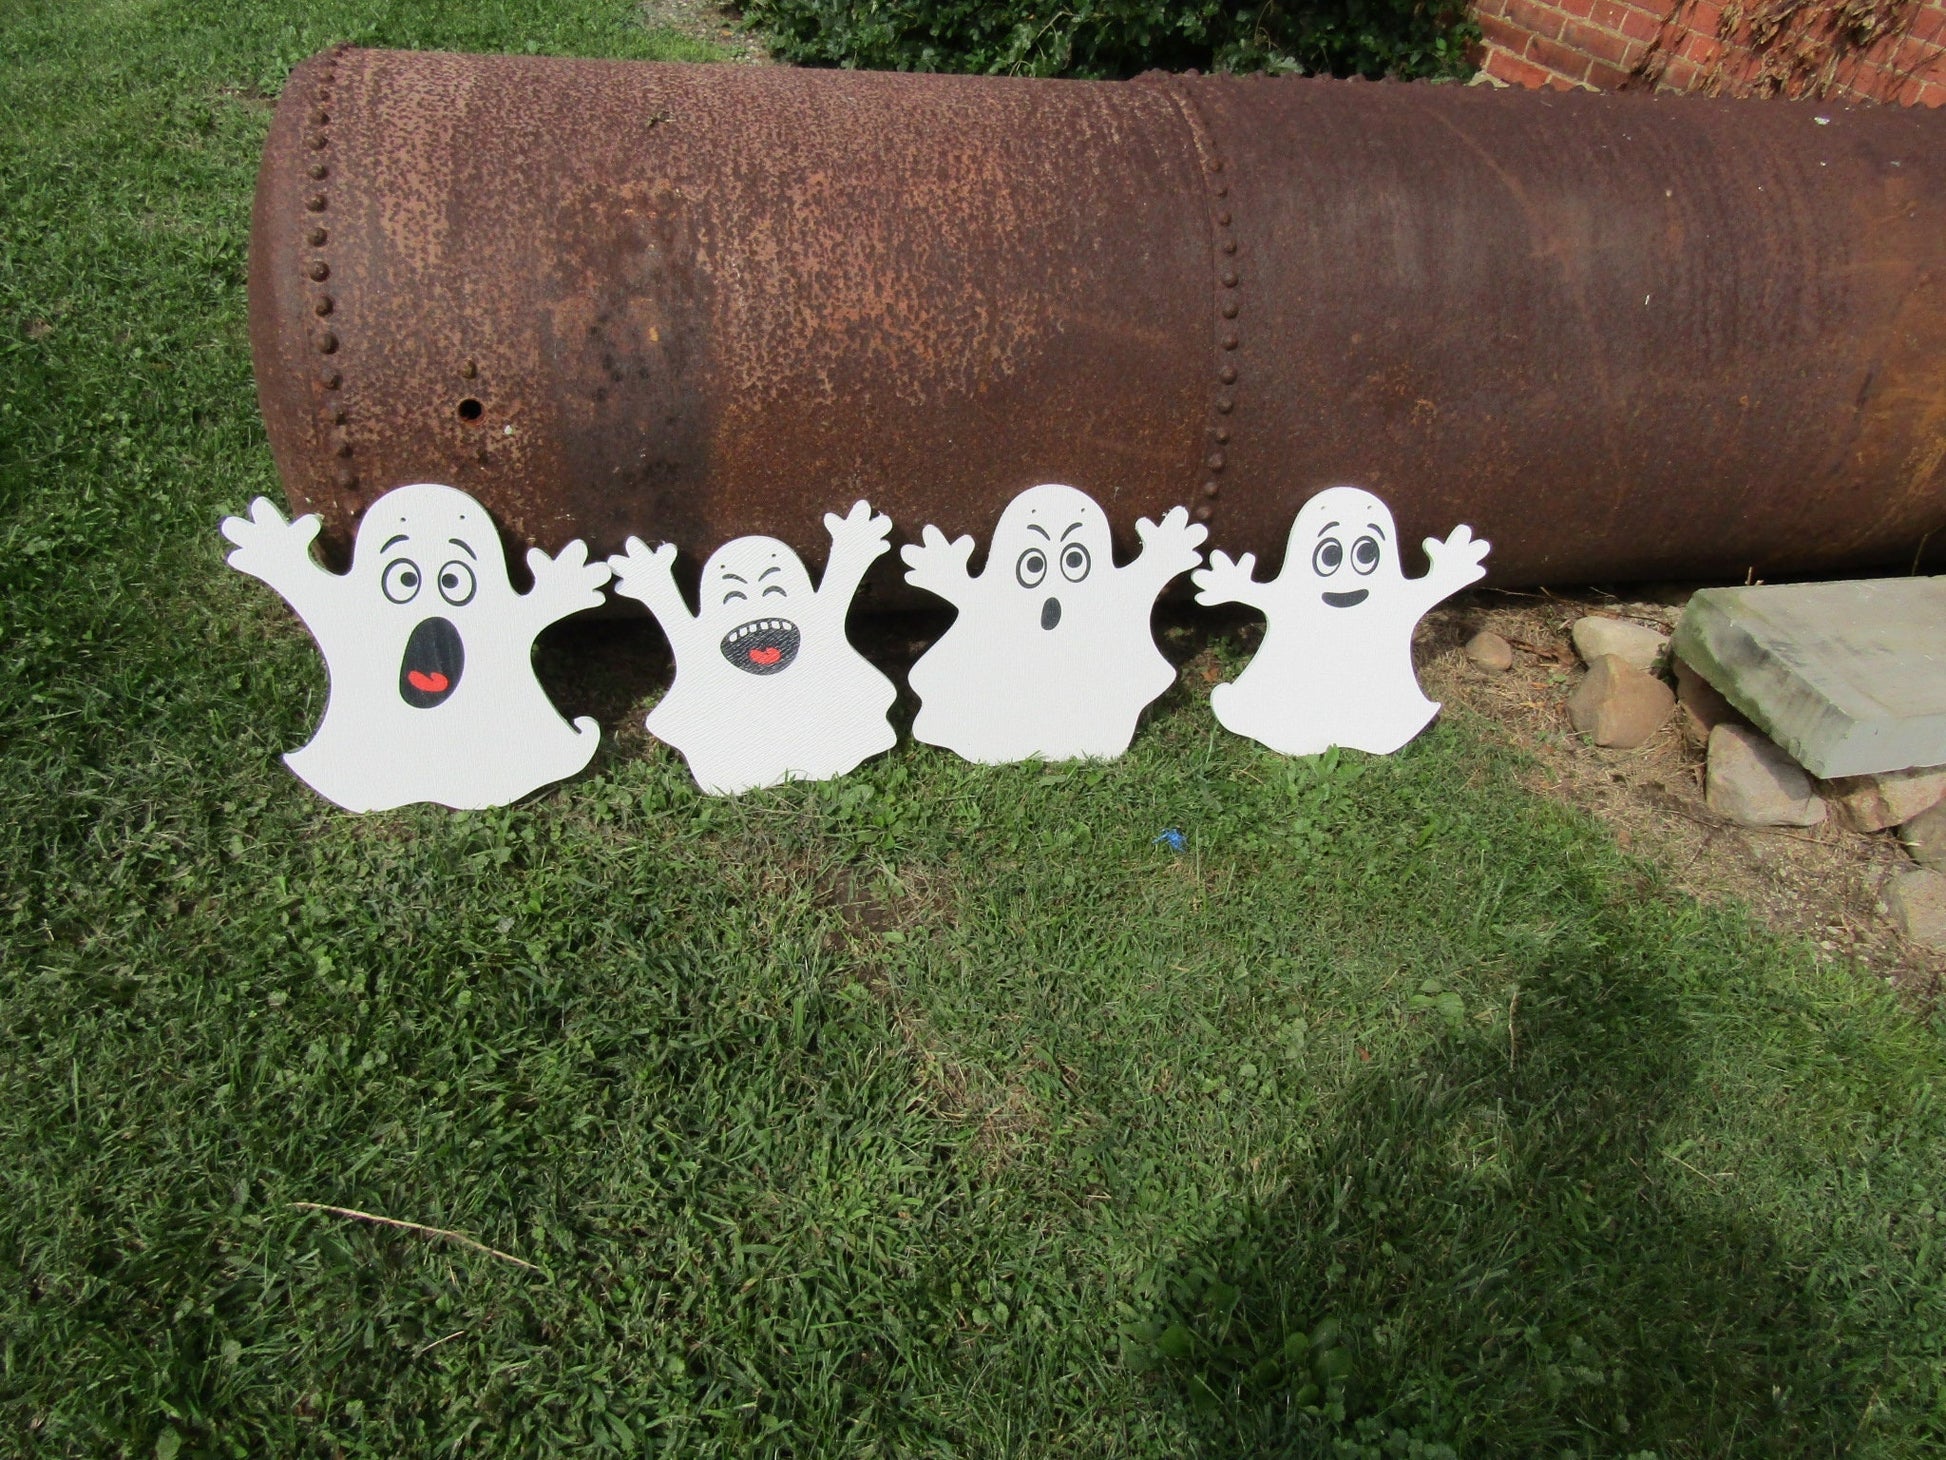 PVC All Weather Ghost Yard Decor Halloween Decoration Weather Proof Gastly Ghosts Set Of 4 Thick Fall Autumn Trick or Treat Spooky Fun